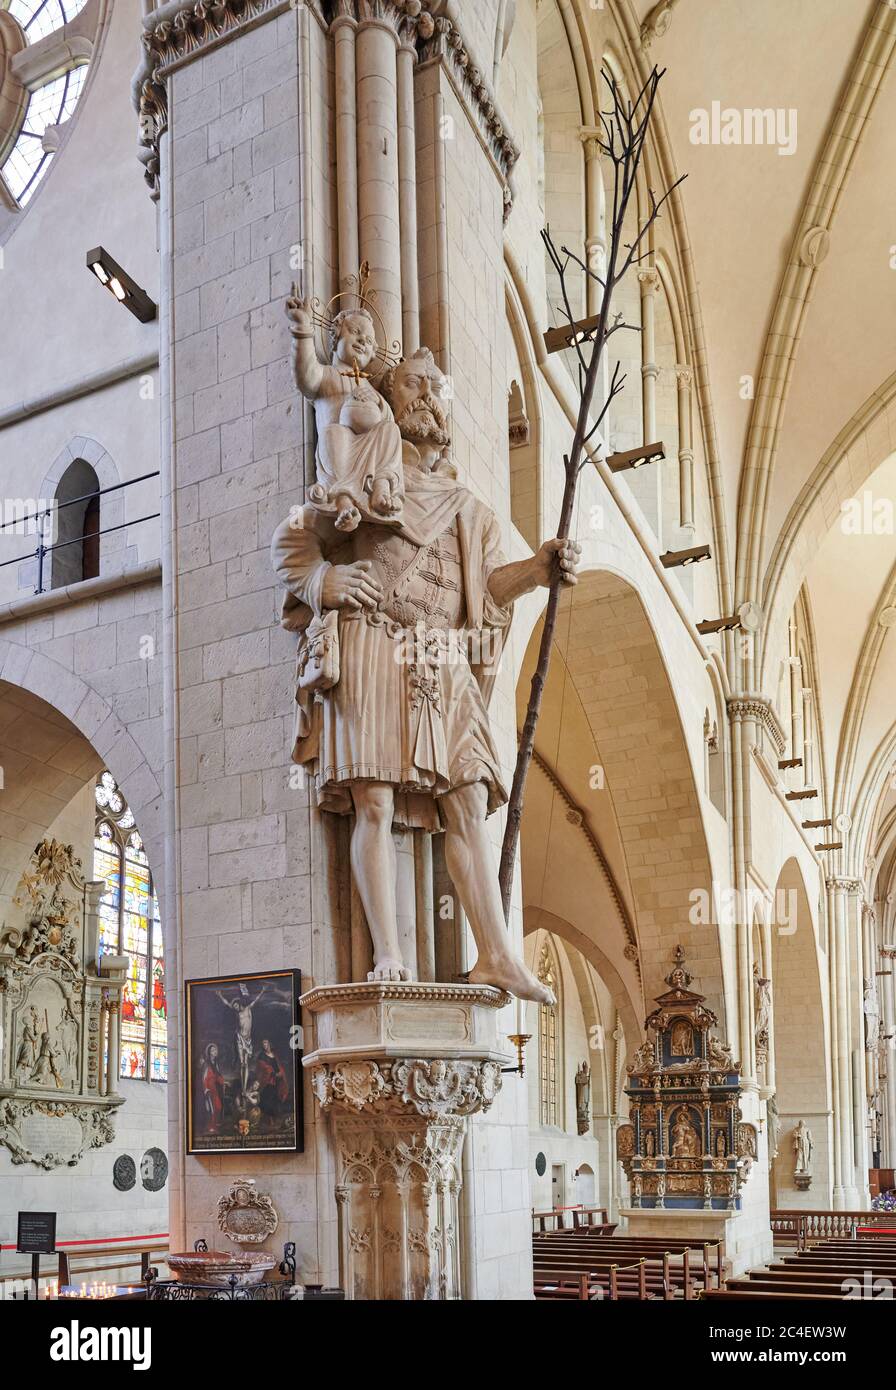 THE STATUE OF SAINT CHRISTOPHORUS, interior shot of Muenster Cathedral,  St.-Paulus-Dom, Muenster, North Rhine-Westphalia, Germany Stock Photo -  Alamy